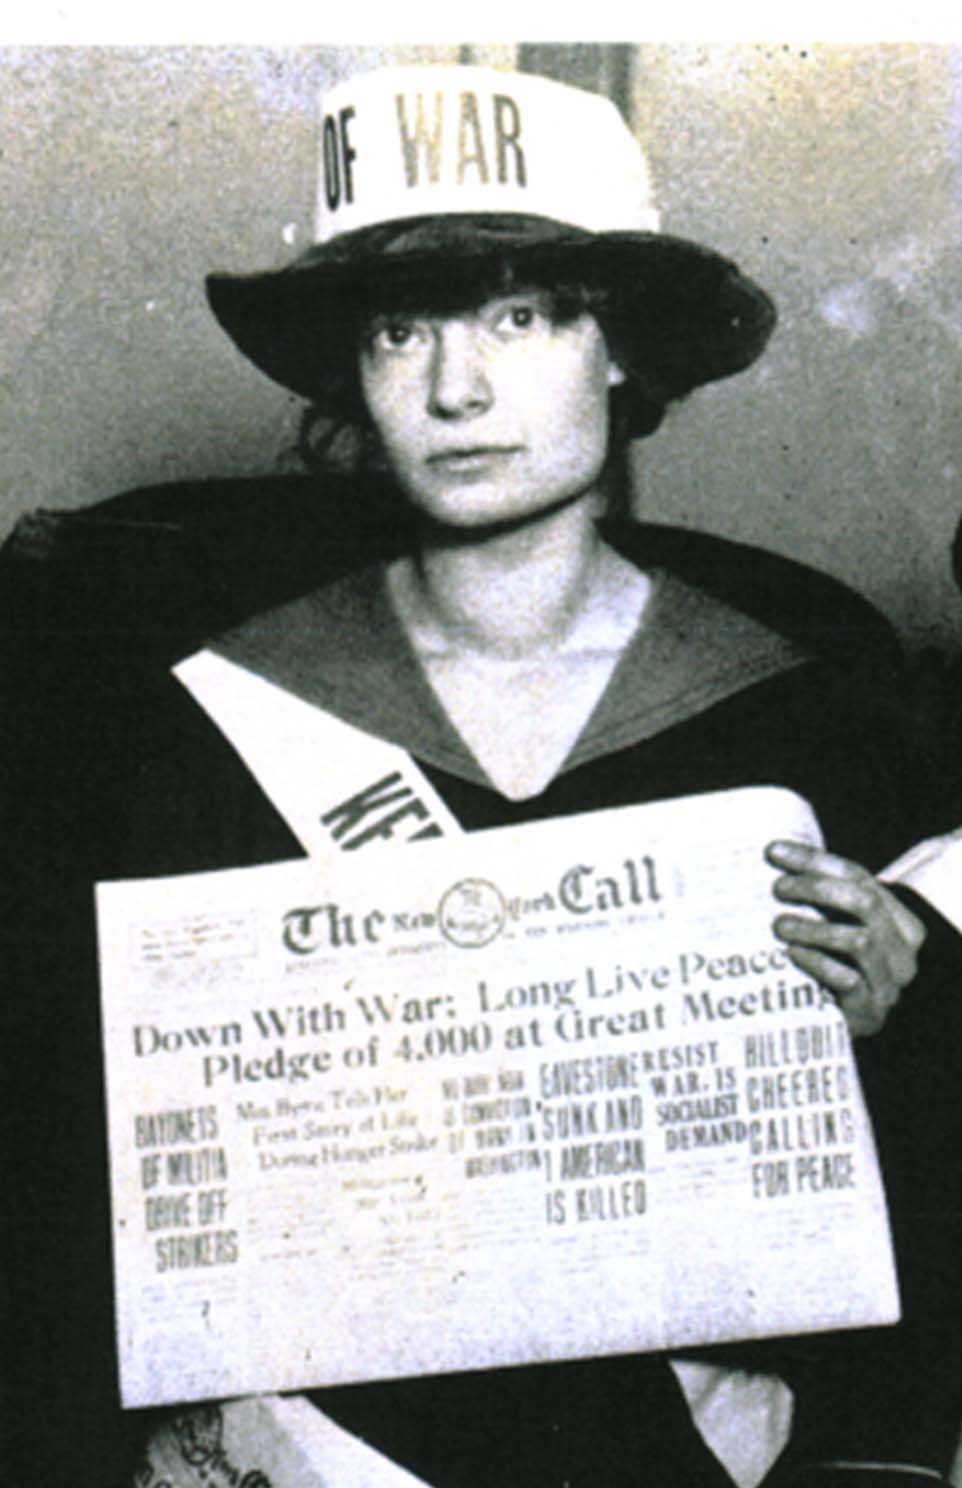 Image of Dorothy Day wearing an anti-war hat and sash